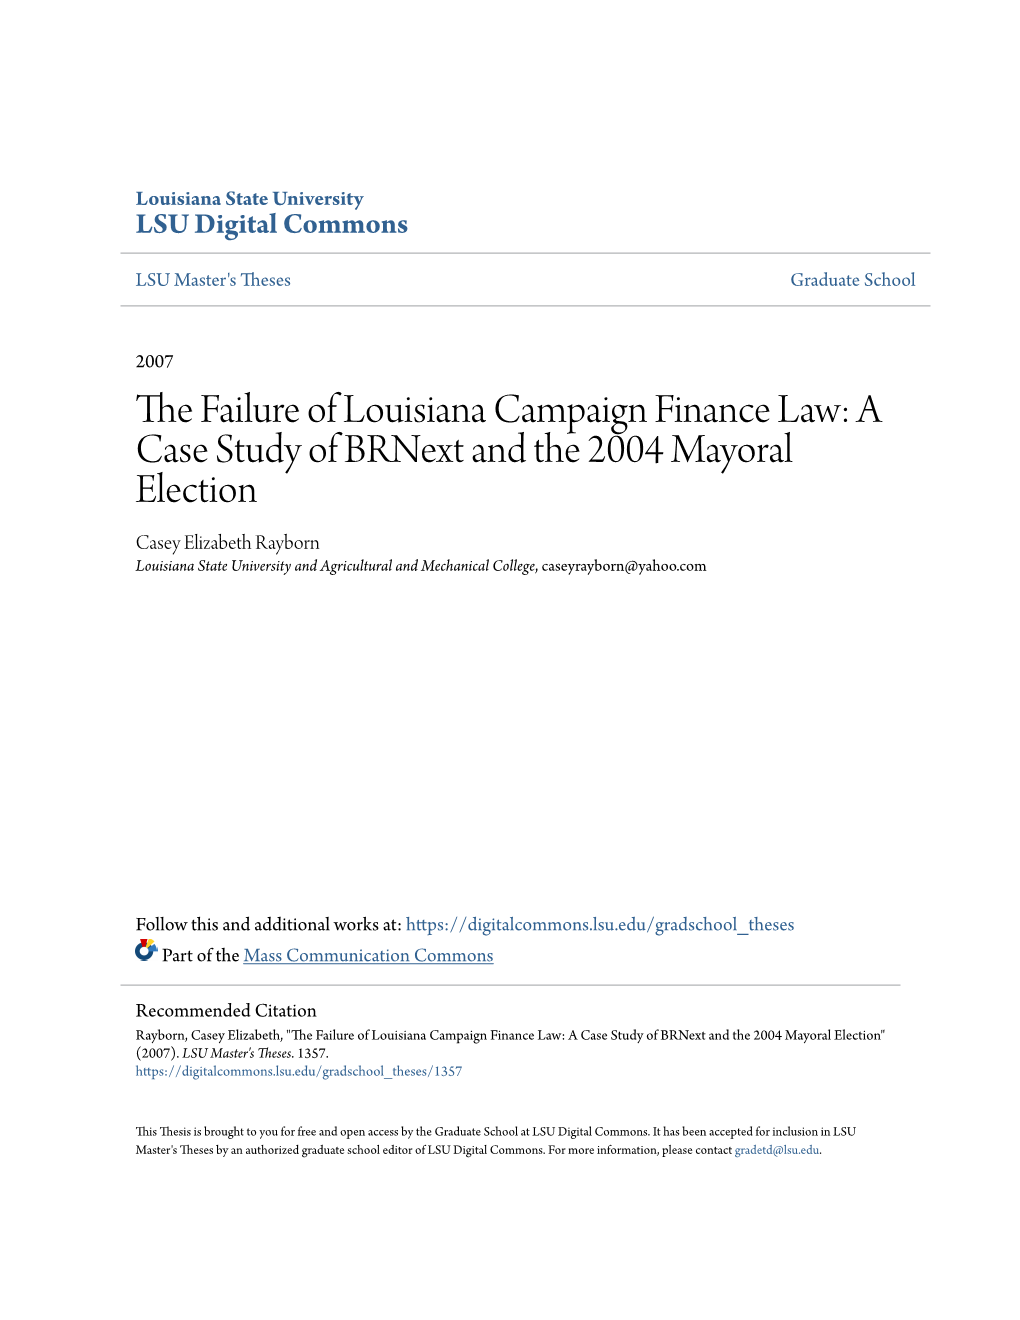 The Failure of Louisiana Campaign Finance Law: a Case Study of Brnext and the 2004 Baton Rouge Mayoral Election